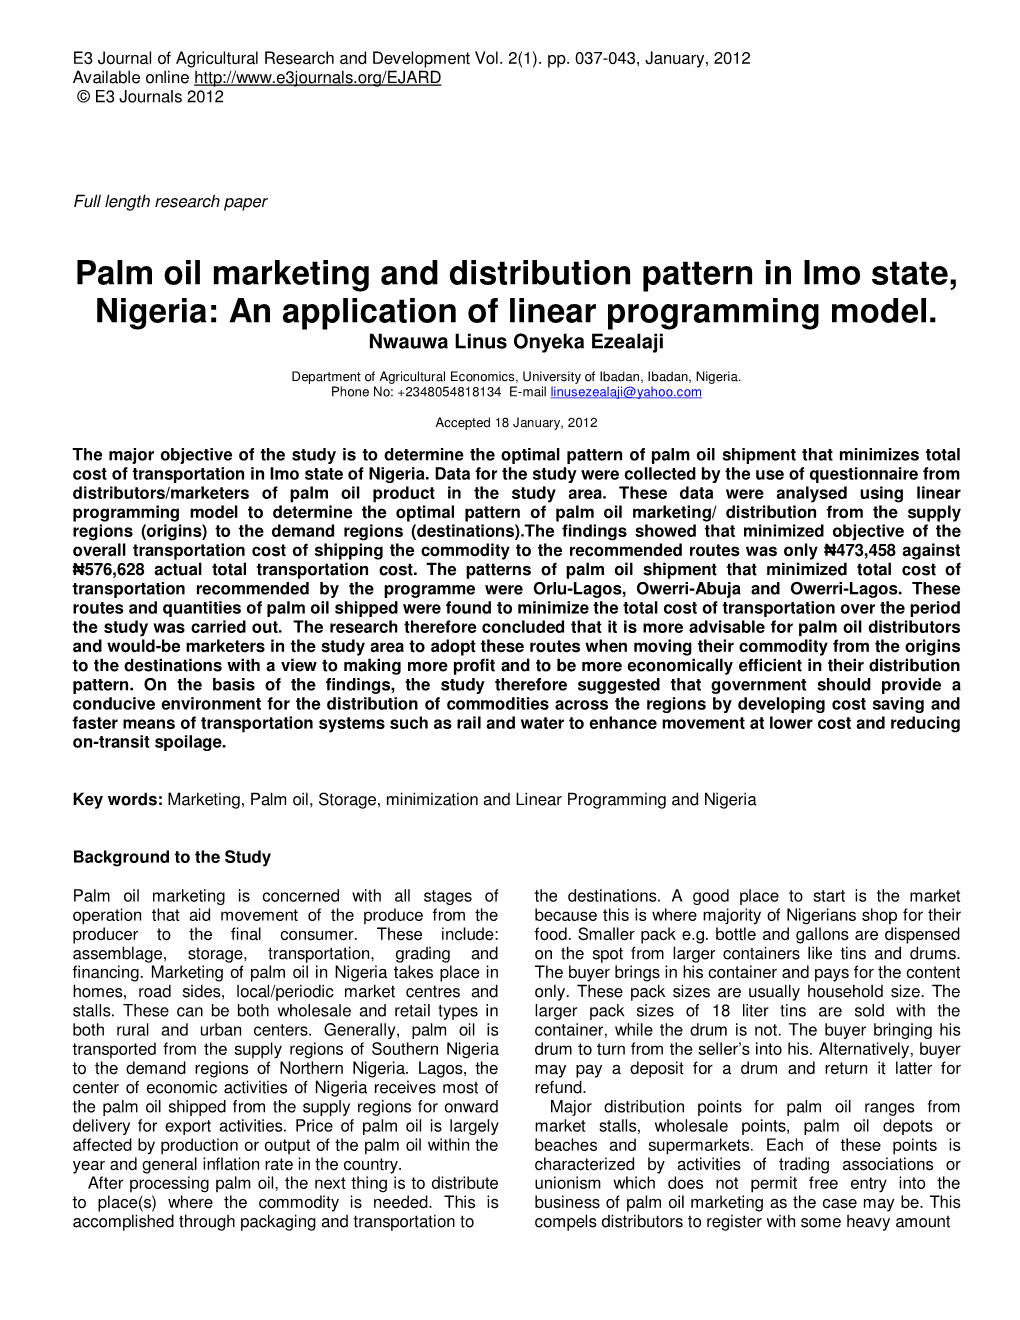 Palm Oil Marketing and Distribution Pattern in Imo State, Nigeria: an Application of Linear Programming Model